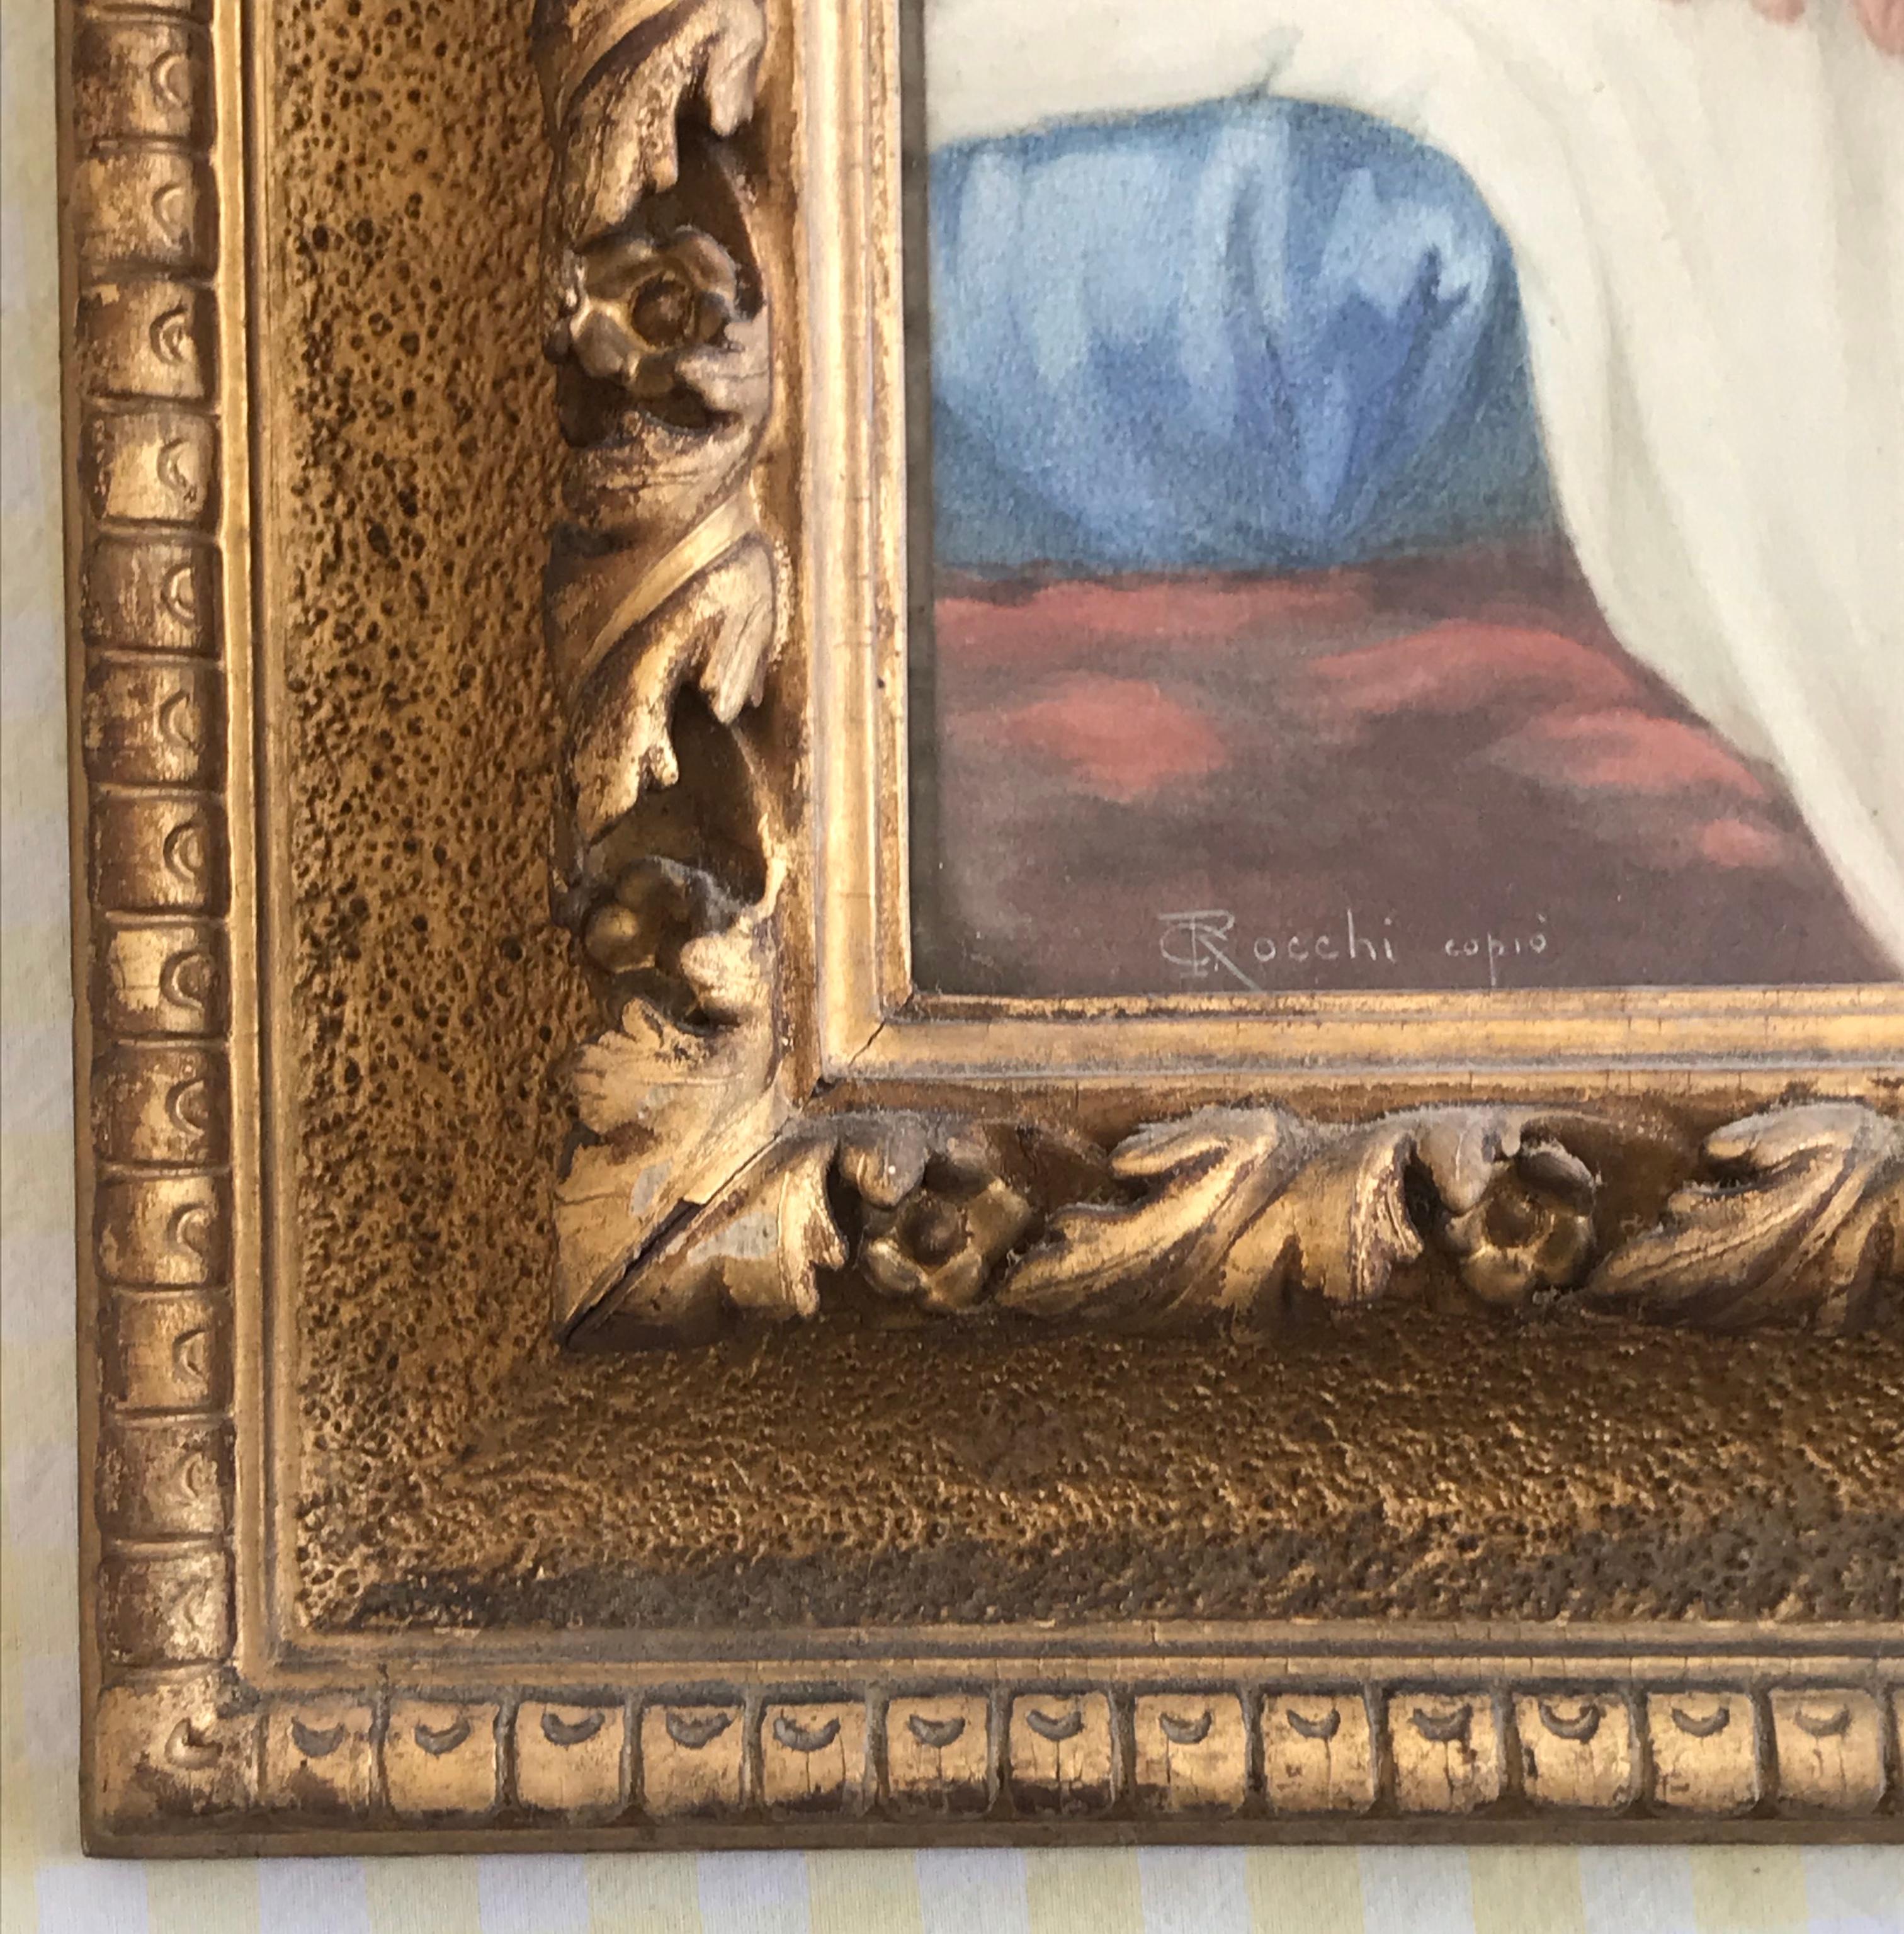 A beautiful 19th century copy by Giuseppe Rocchi of Baldassarre Franceschini's Sleeping Cupid, presented in a very attractive gilt frame with hand carved mouldings. A very peaceful image ideal for a living room or bedroom.

Giuseppe Rocchi (19th